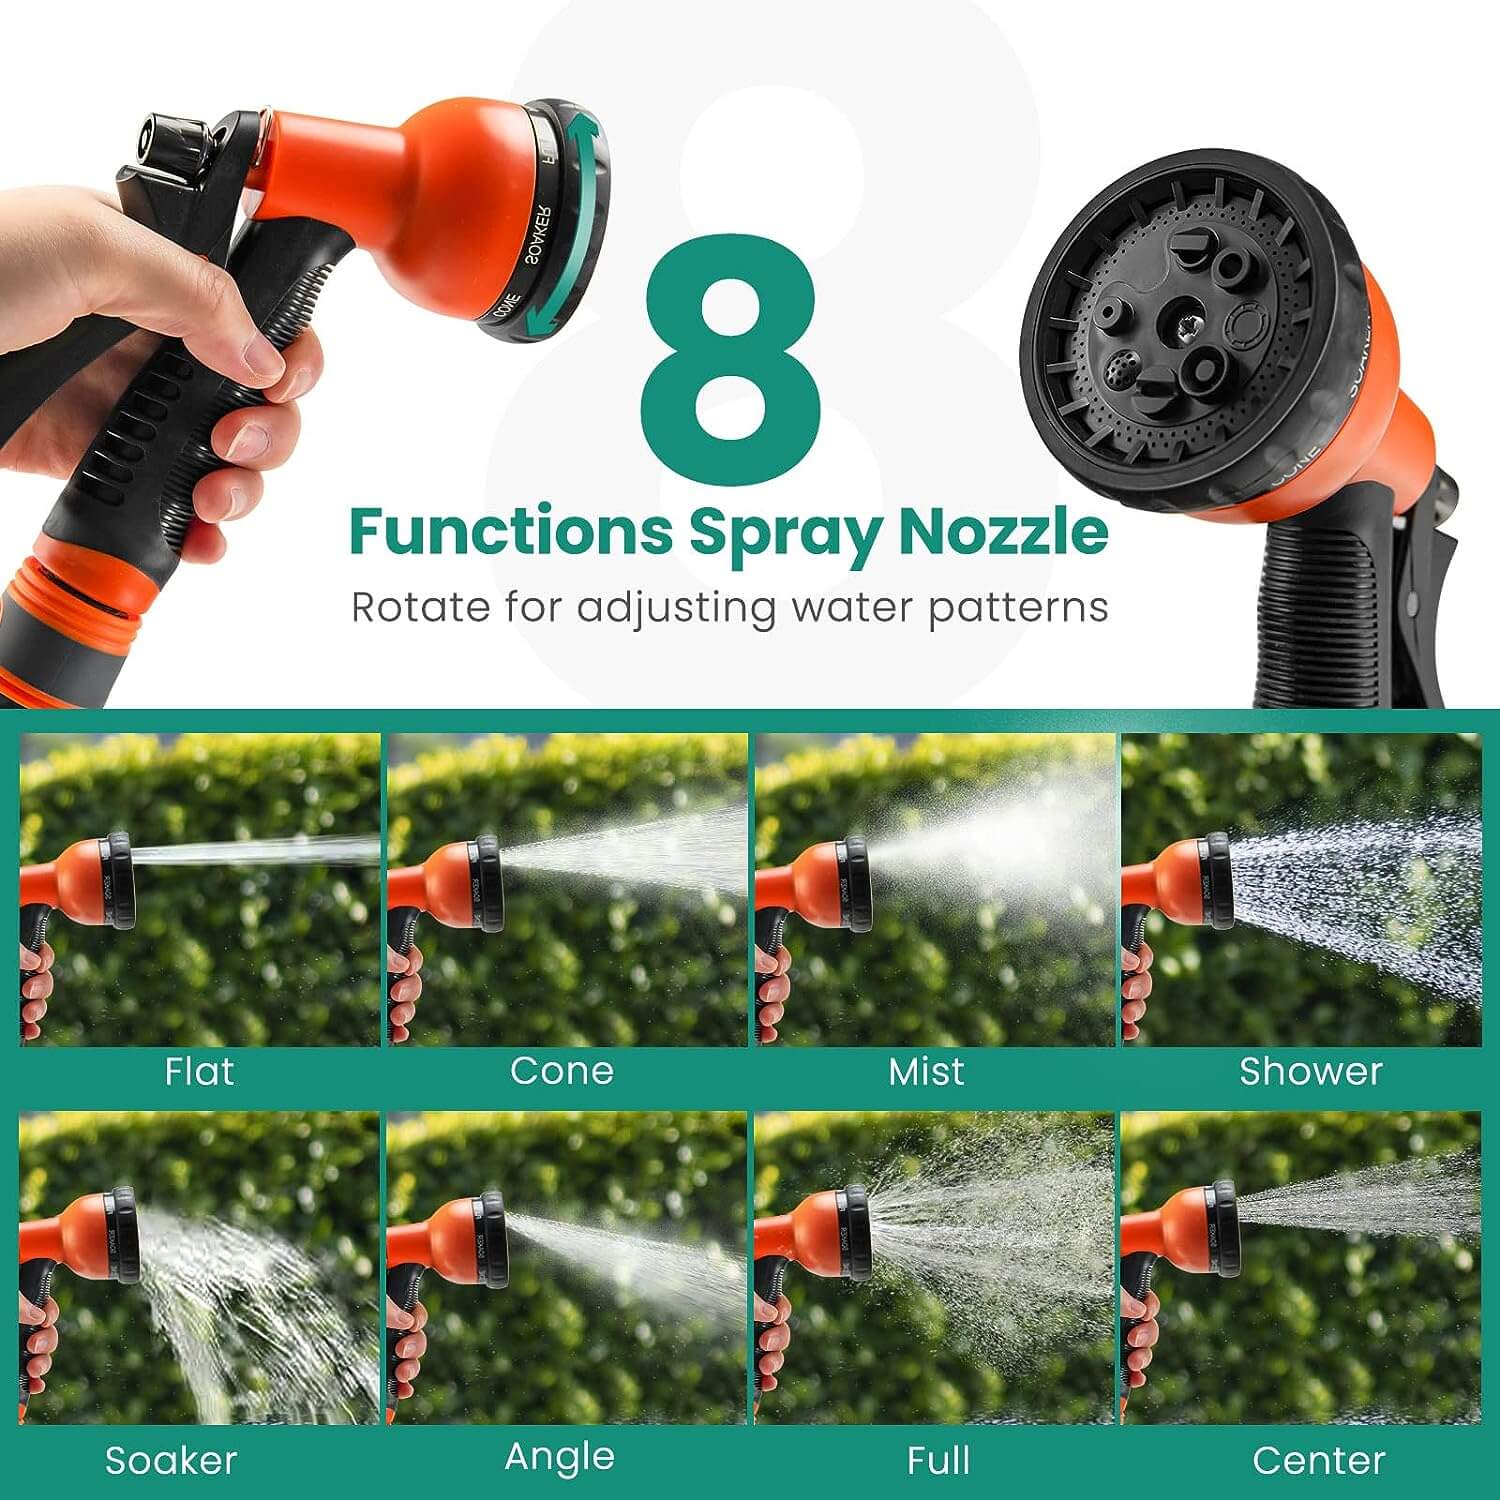 The retractable garden hose reel is equipped with an 8 functions spray nozzle which is rotatable to adjust water patterns, meeting your different needs. In addition, the spray nozzle features self-lock system, so there is no need for you to press the button all the time and reduce fatigue of fingers.